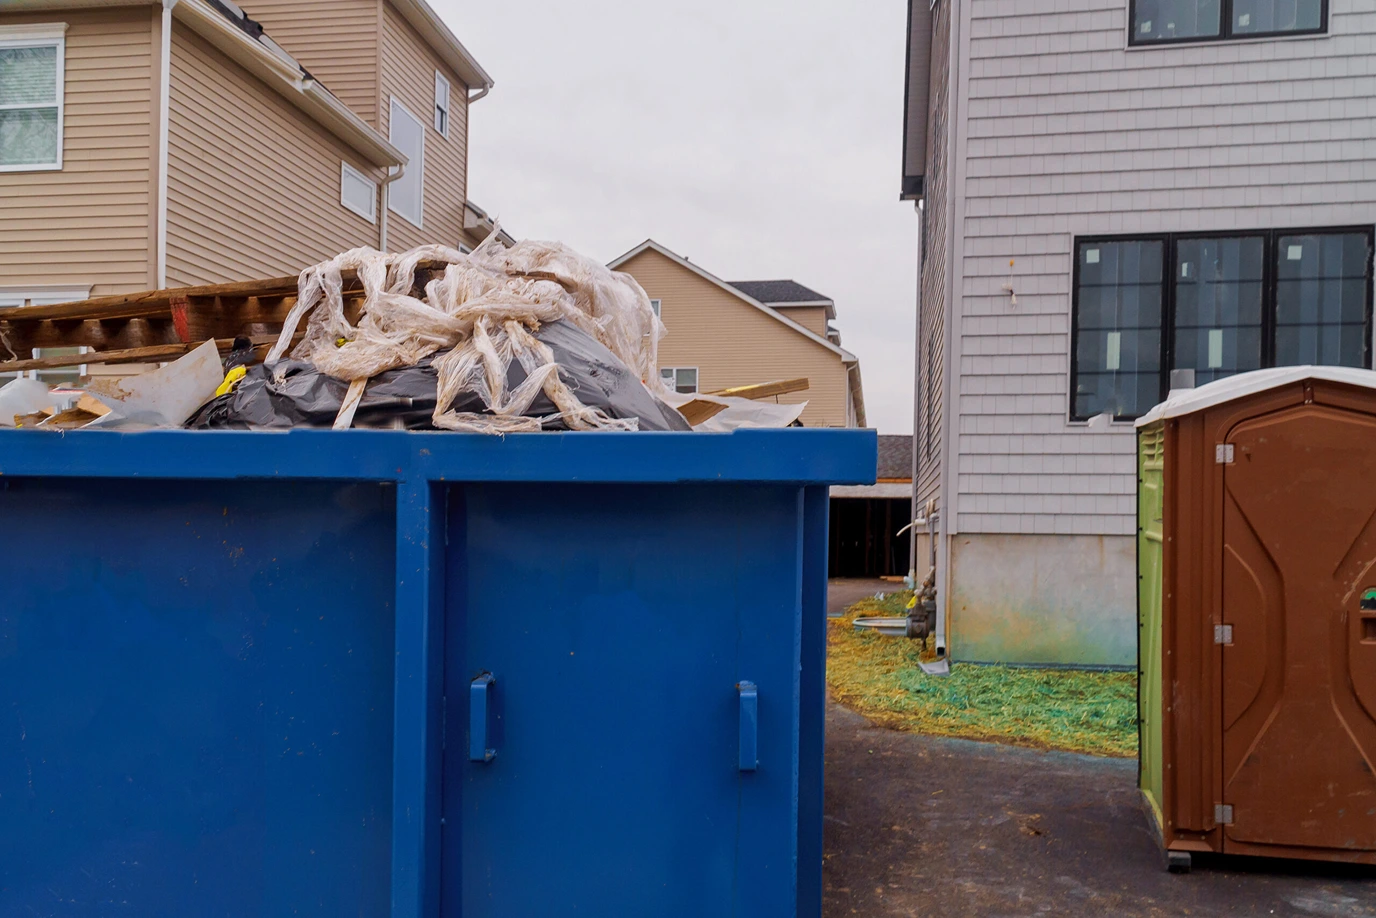 Dumpster Rental for Landscaping and Yard Waste Removal